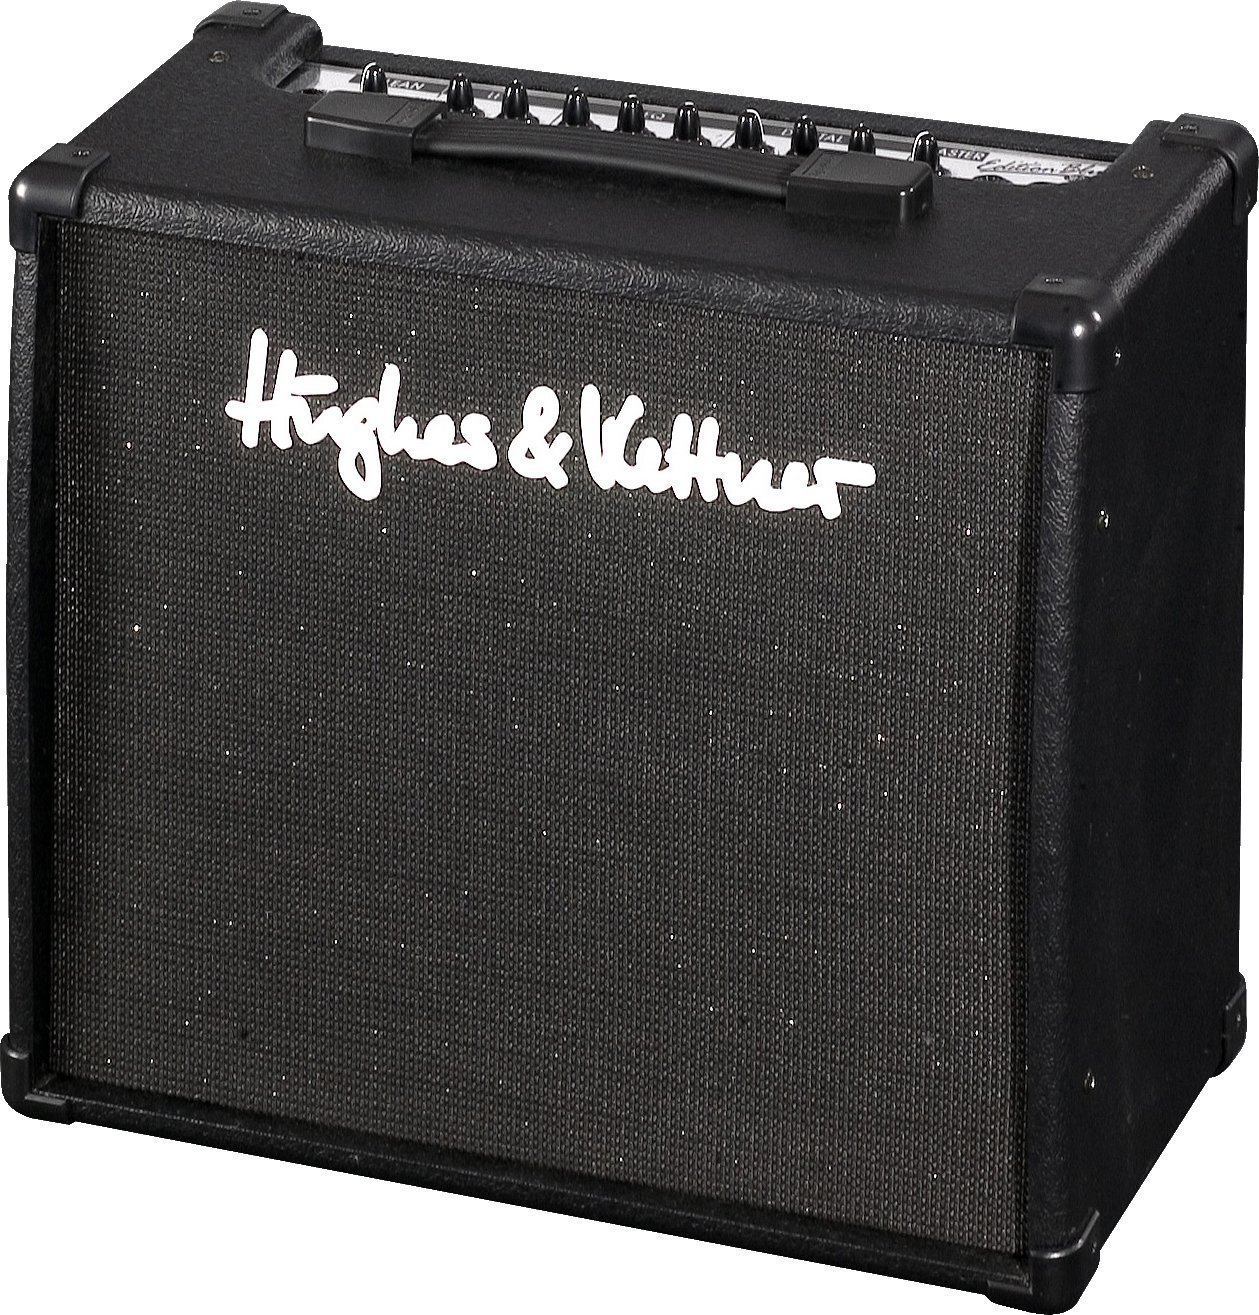 Solid-State Combo Hughes & Kettner Edition Blue 30 DFX